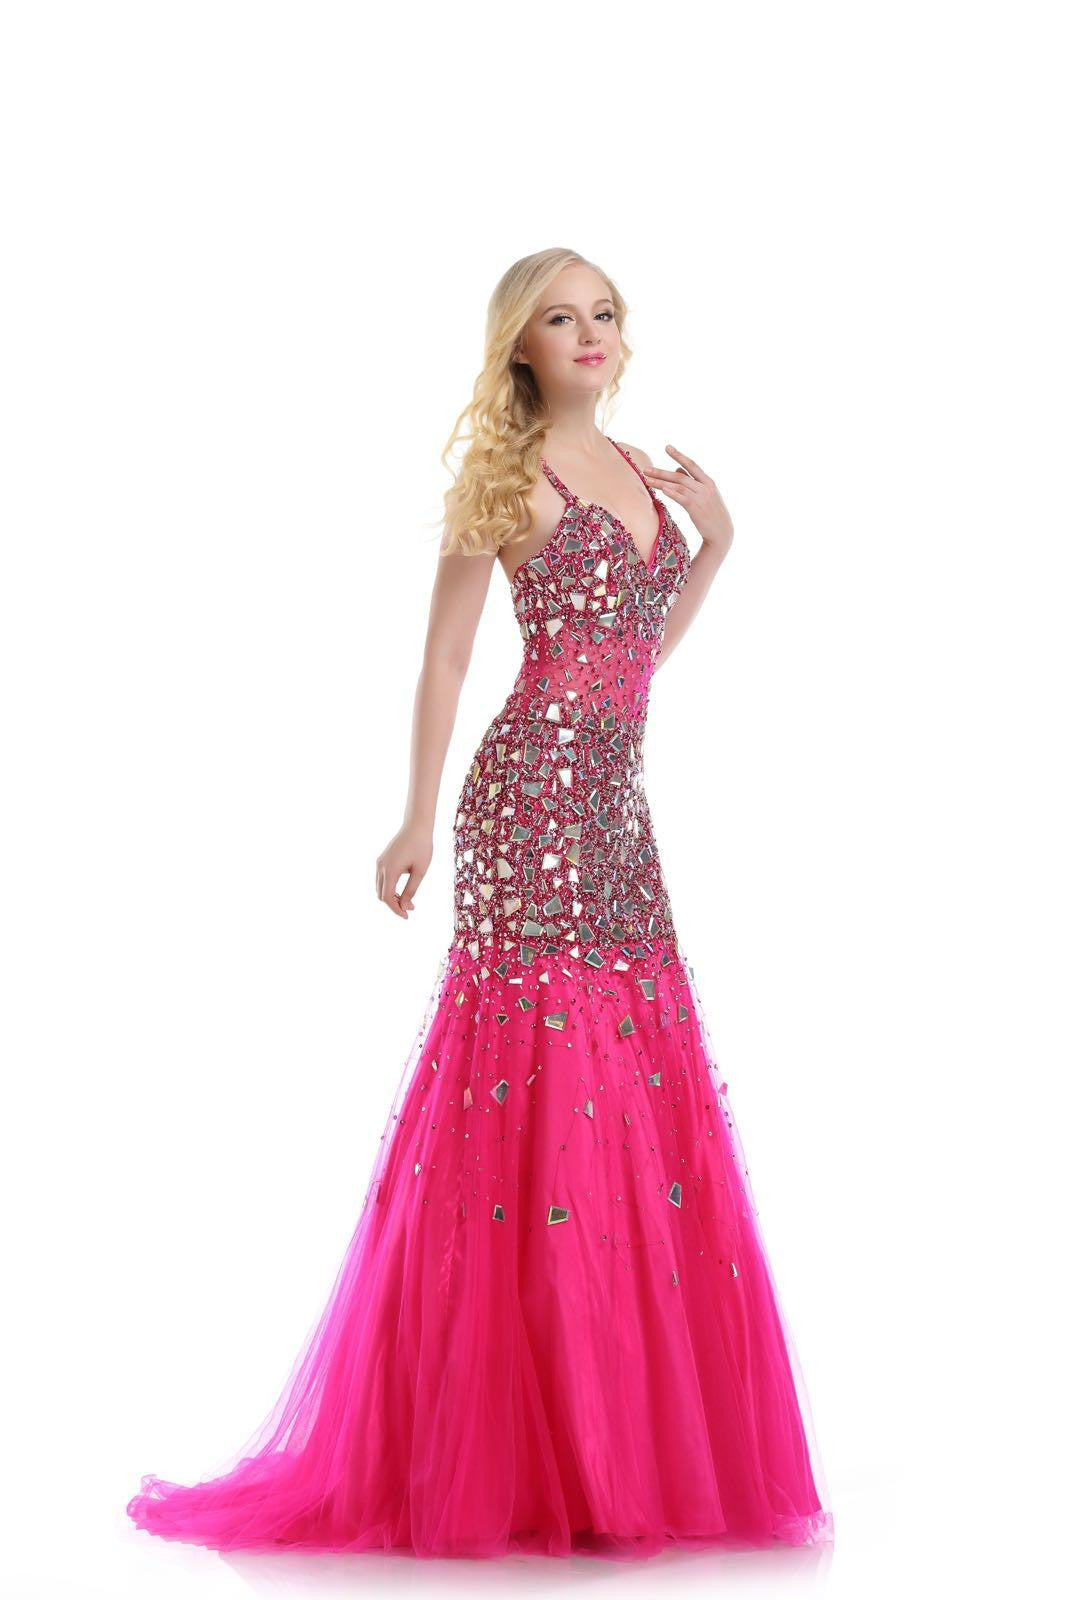 Dazzling Rhinestone Fit and Flare Gown